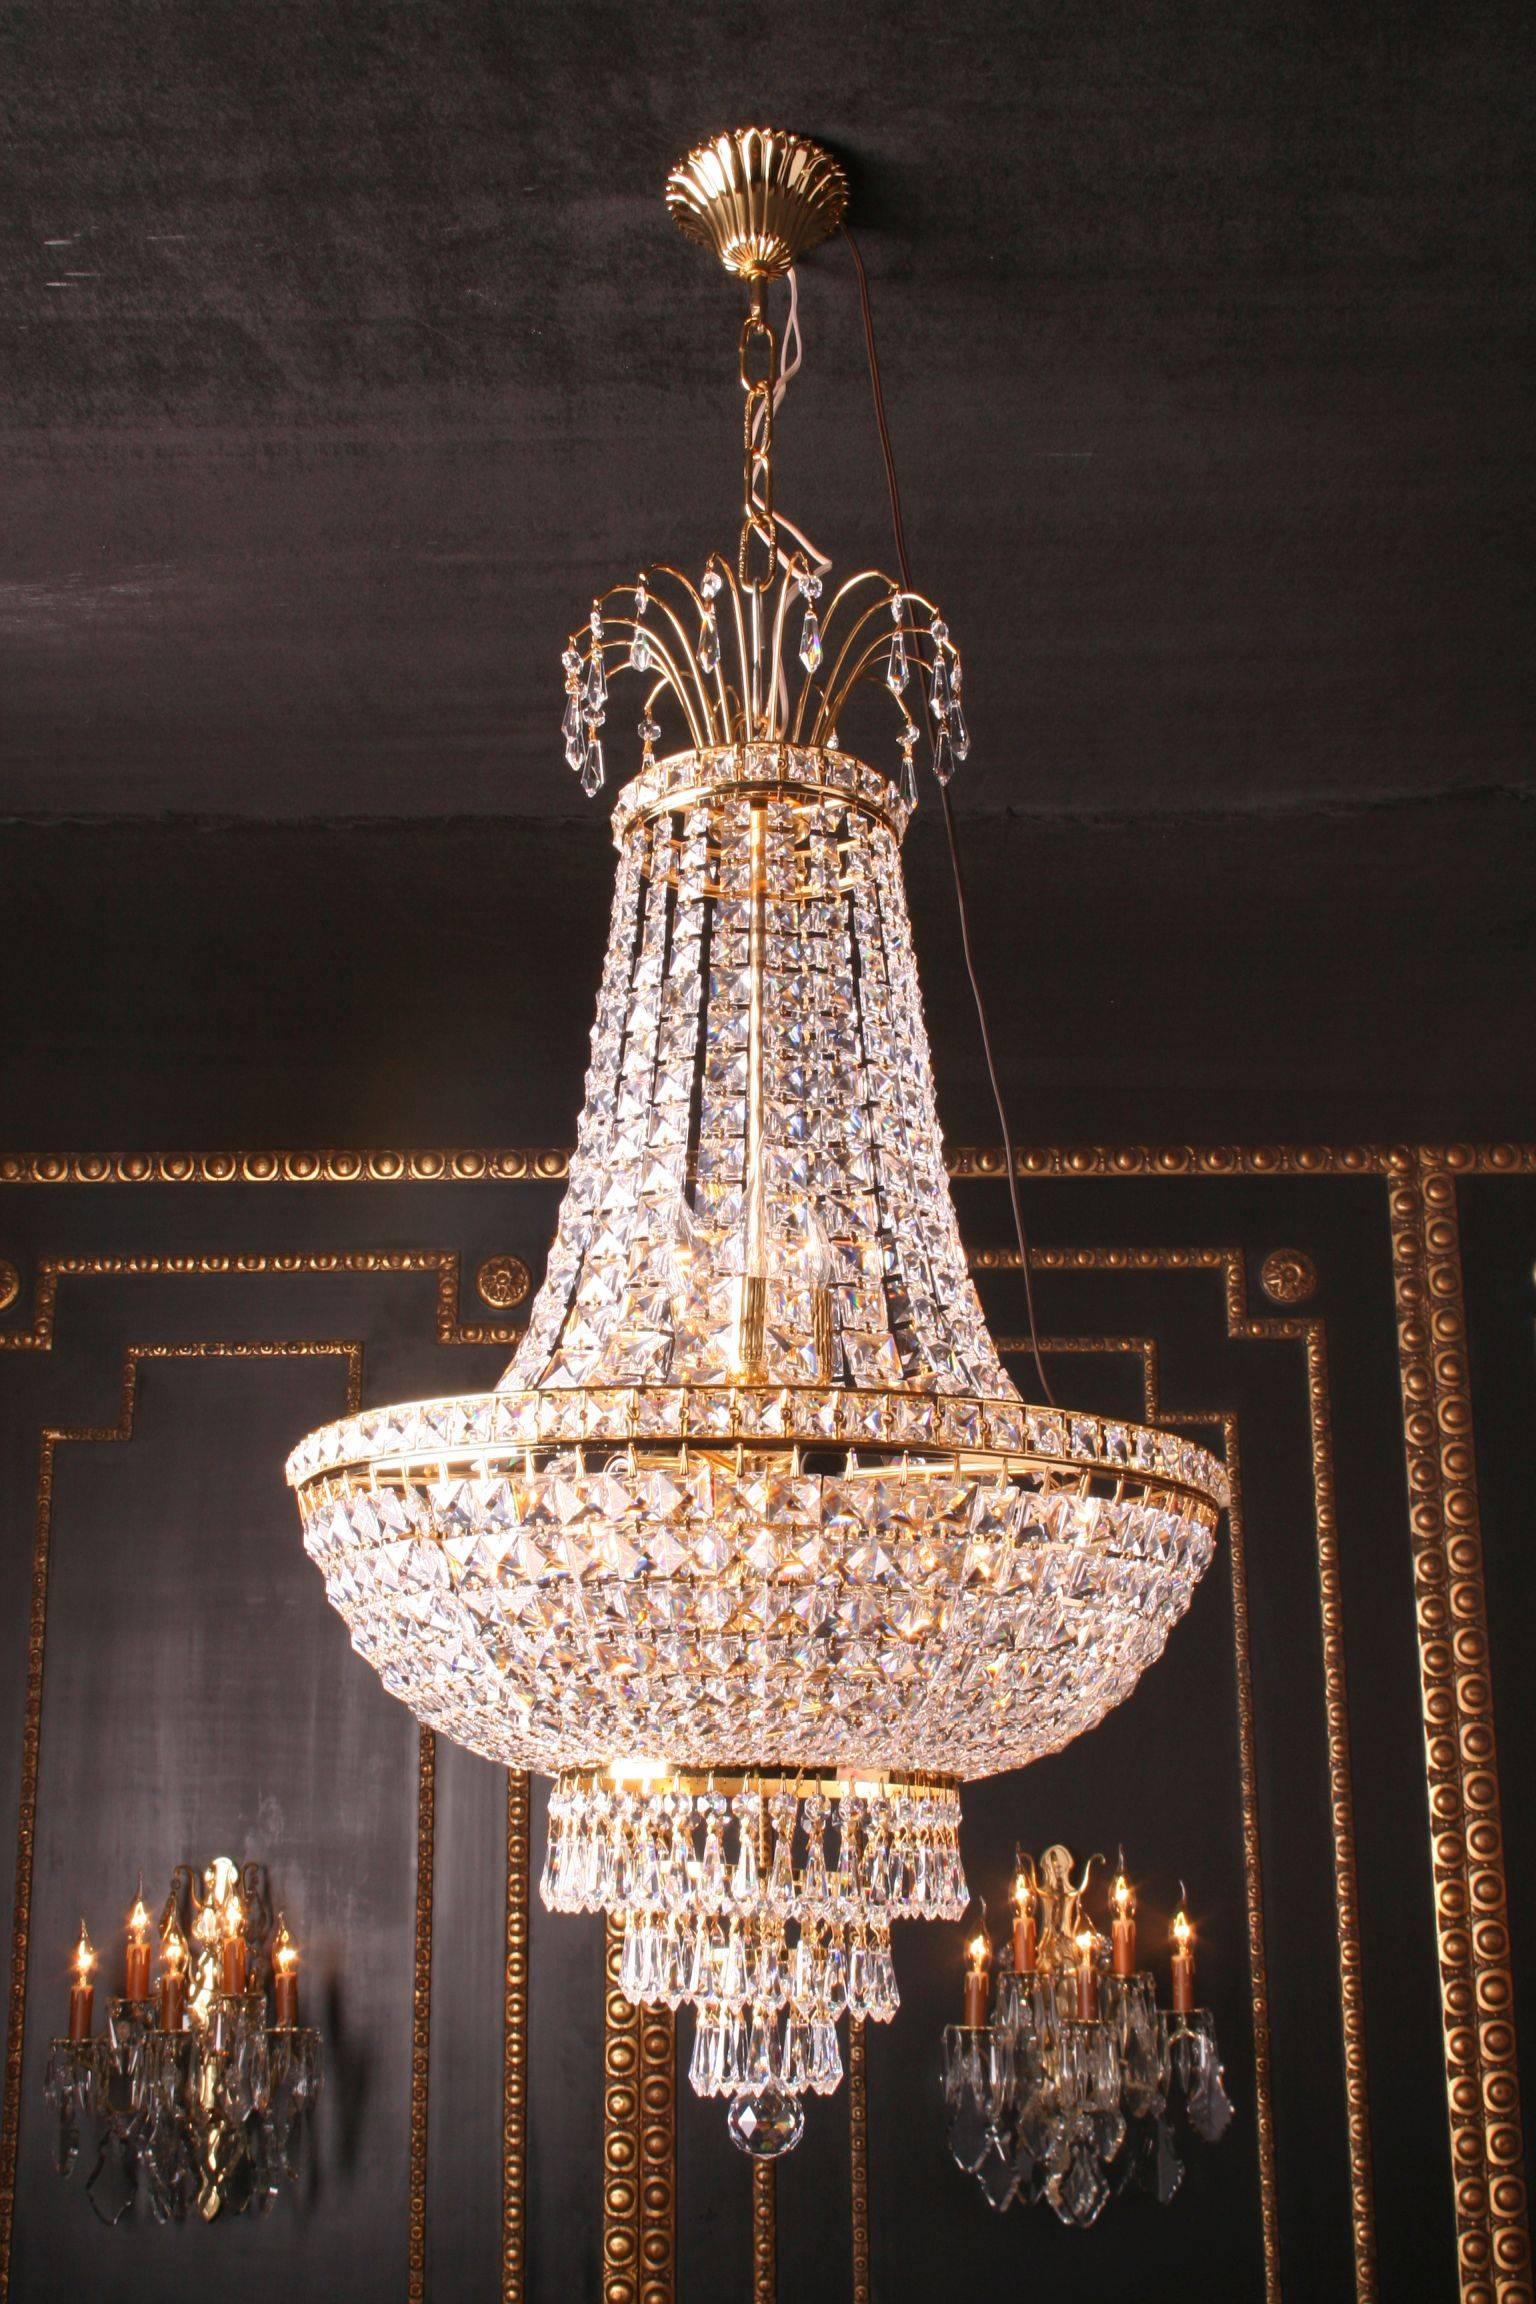 20th century Biedermeier style ceiling chandelier
Ceiling chandelier in Biedermeier style.
Polished brass and facet-polished crystal prism-hangings.

Delivery time can take about 6-8 weeks

(F-Asf-2).